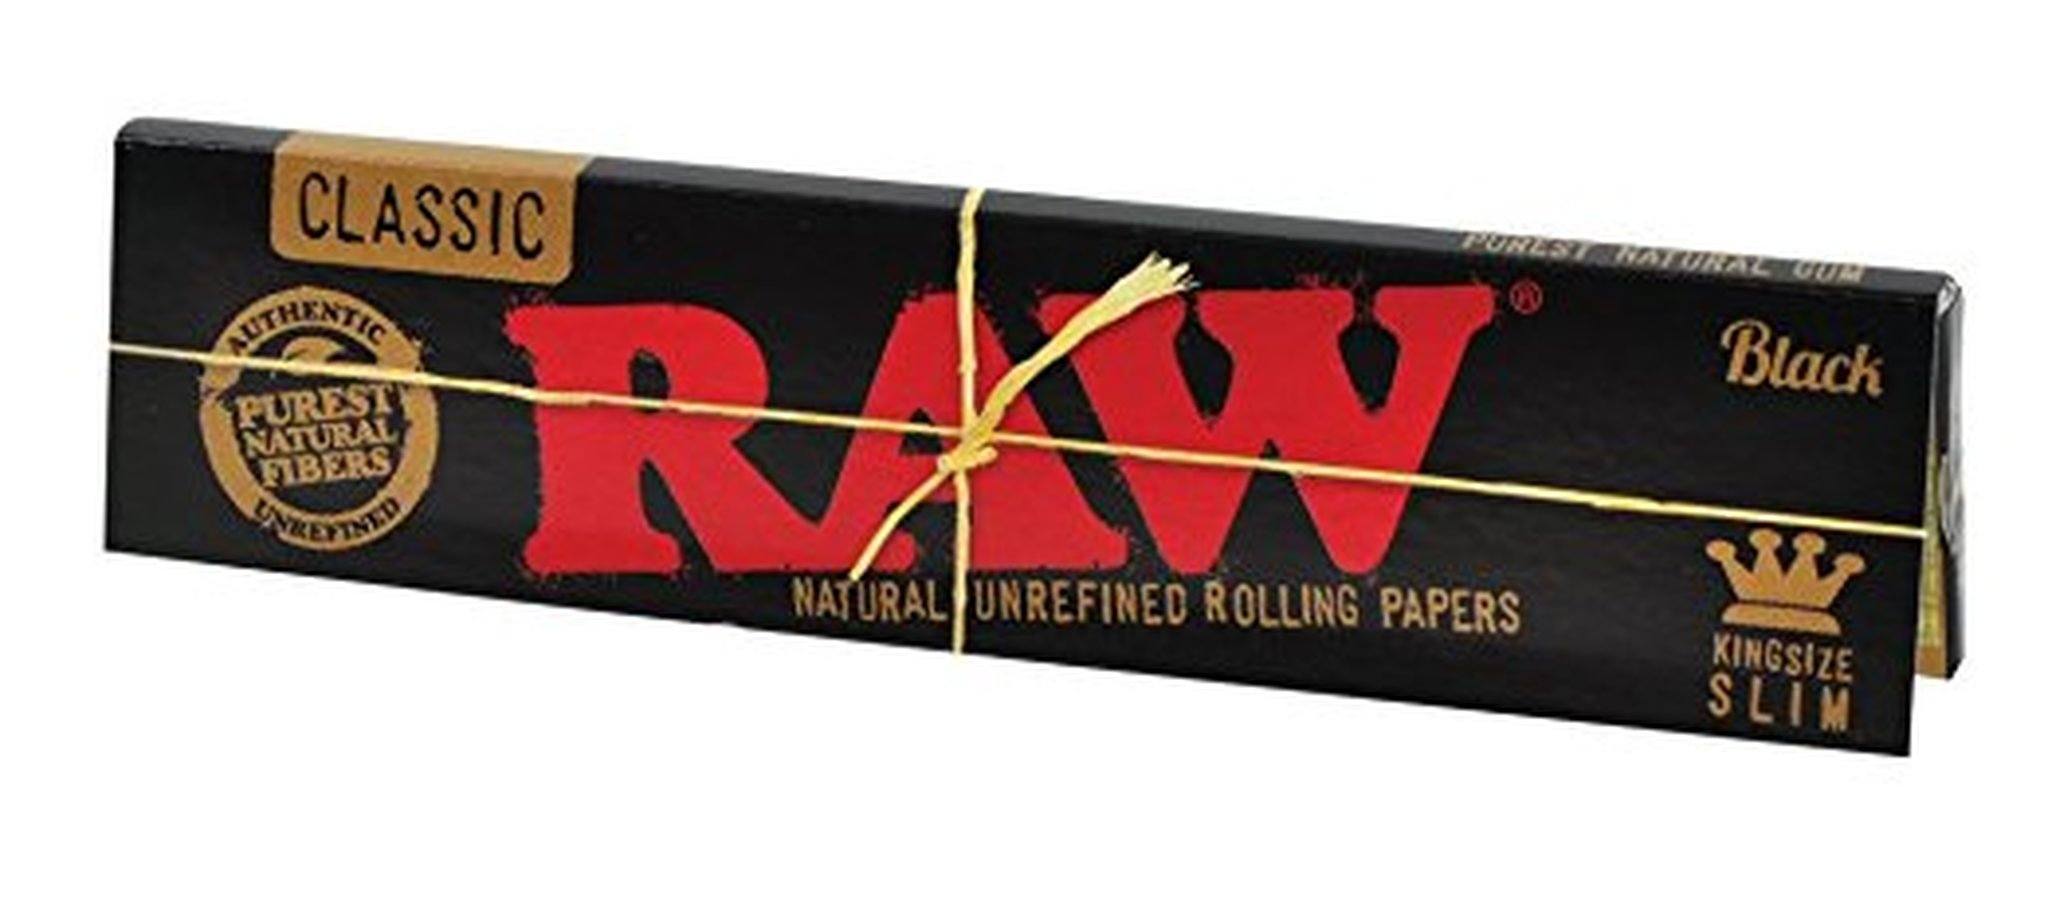 Raw Black King Size Rolling Paper - Full Box of 50 Packs